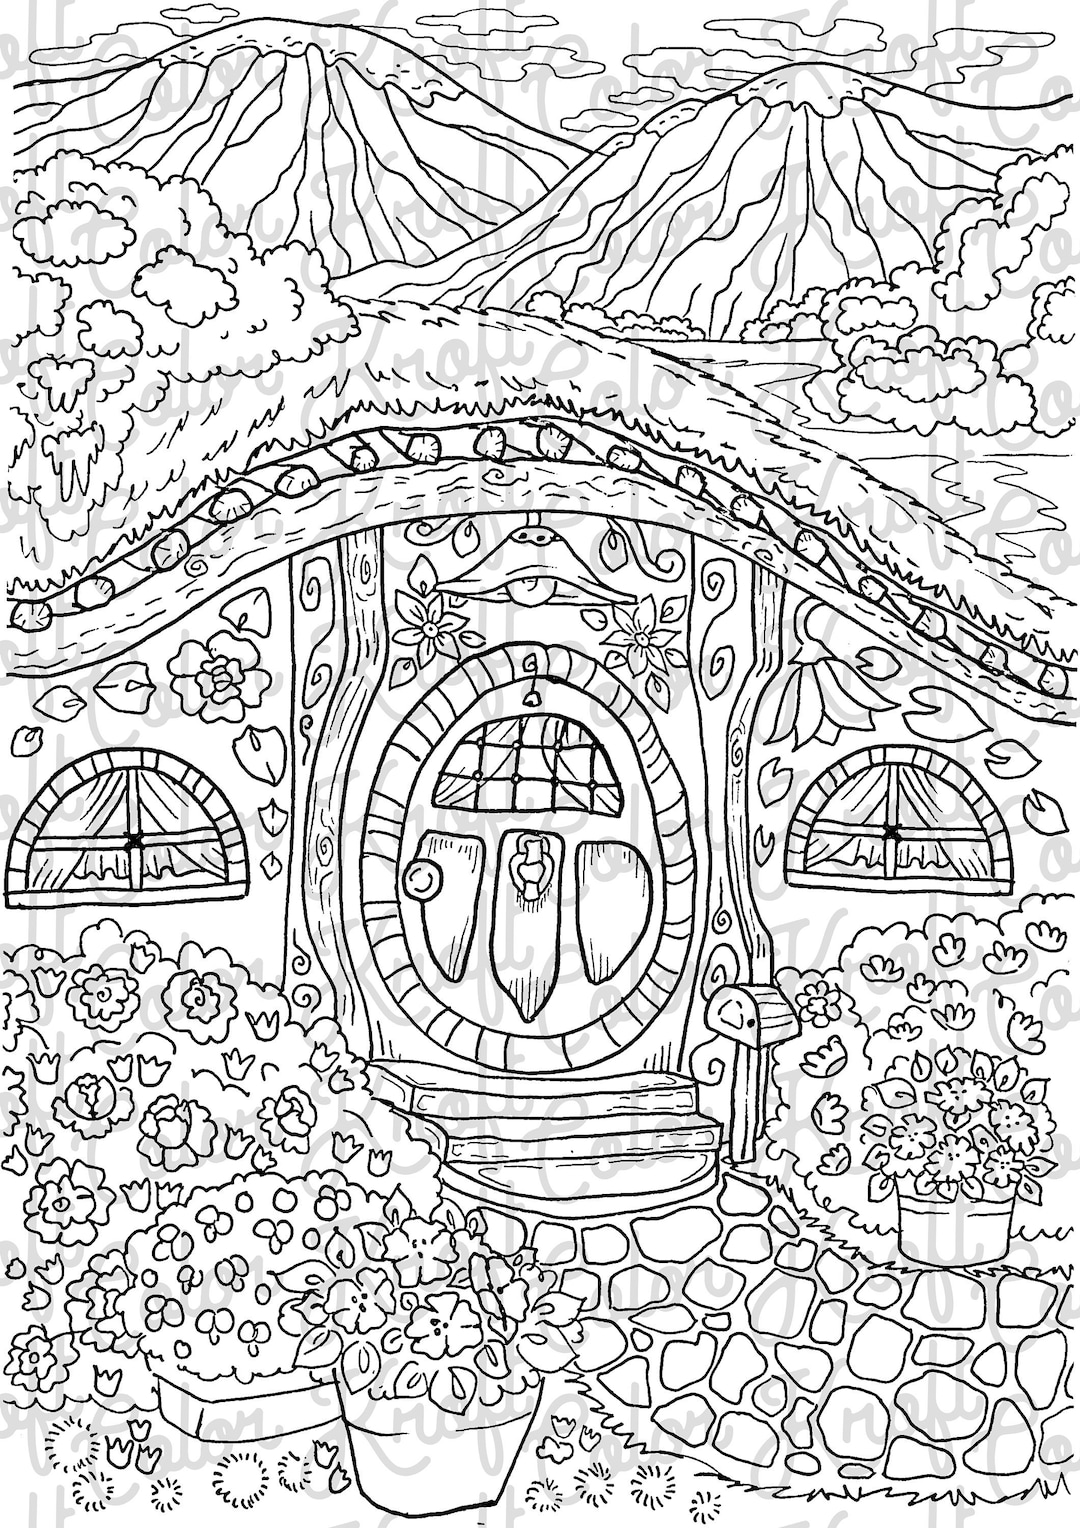 A hobbits home in the hobbit hole coloring page download printable coloring page